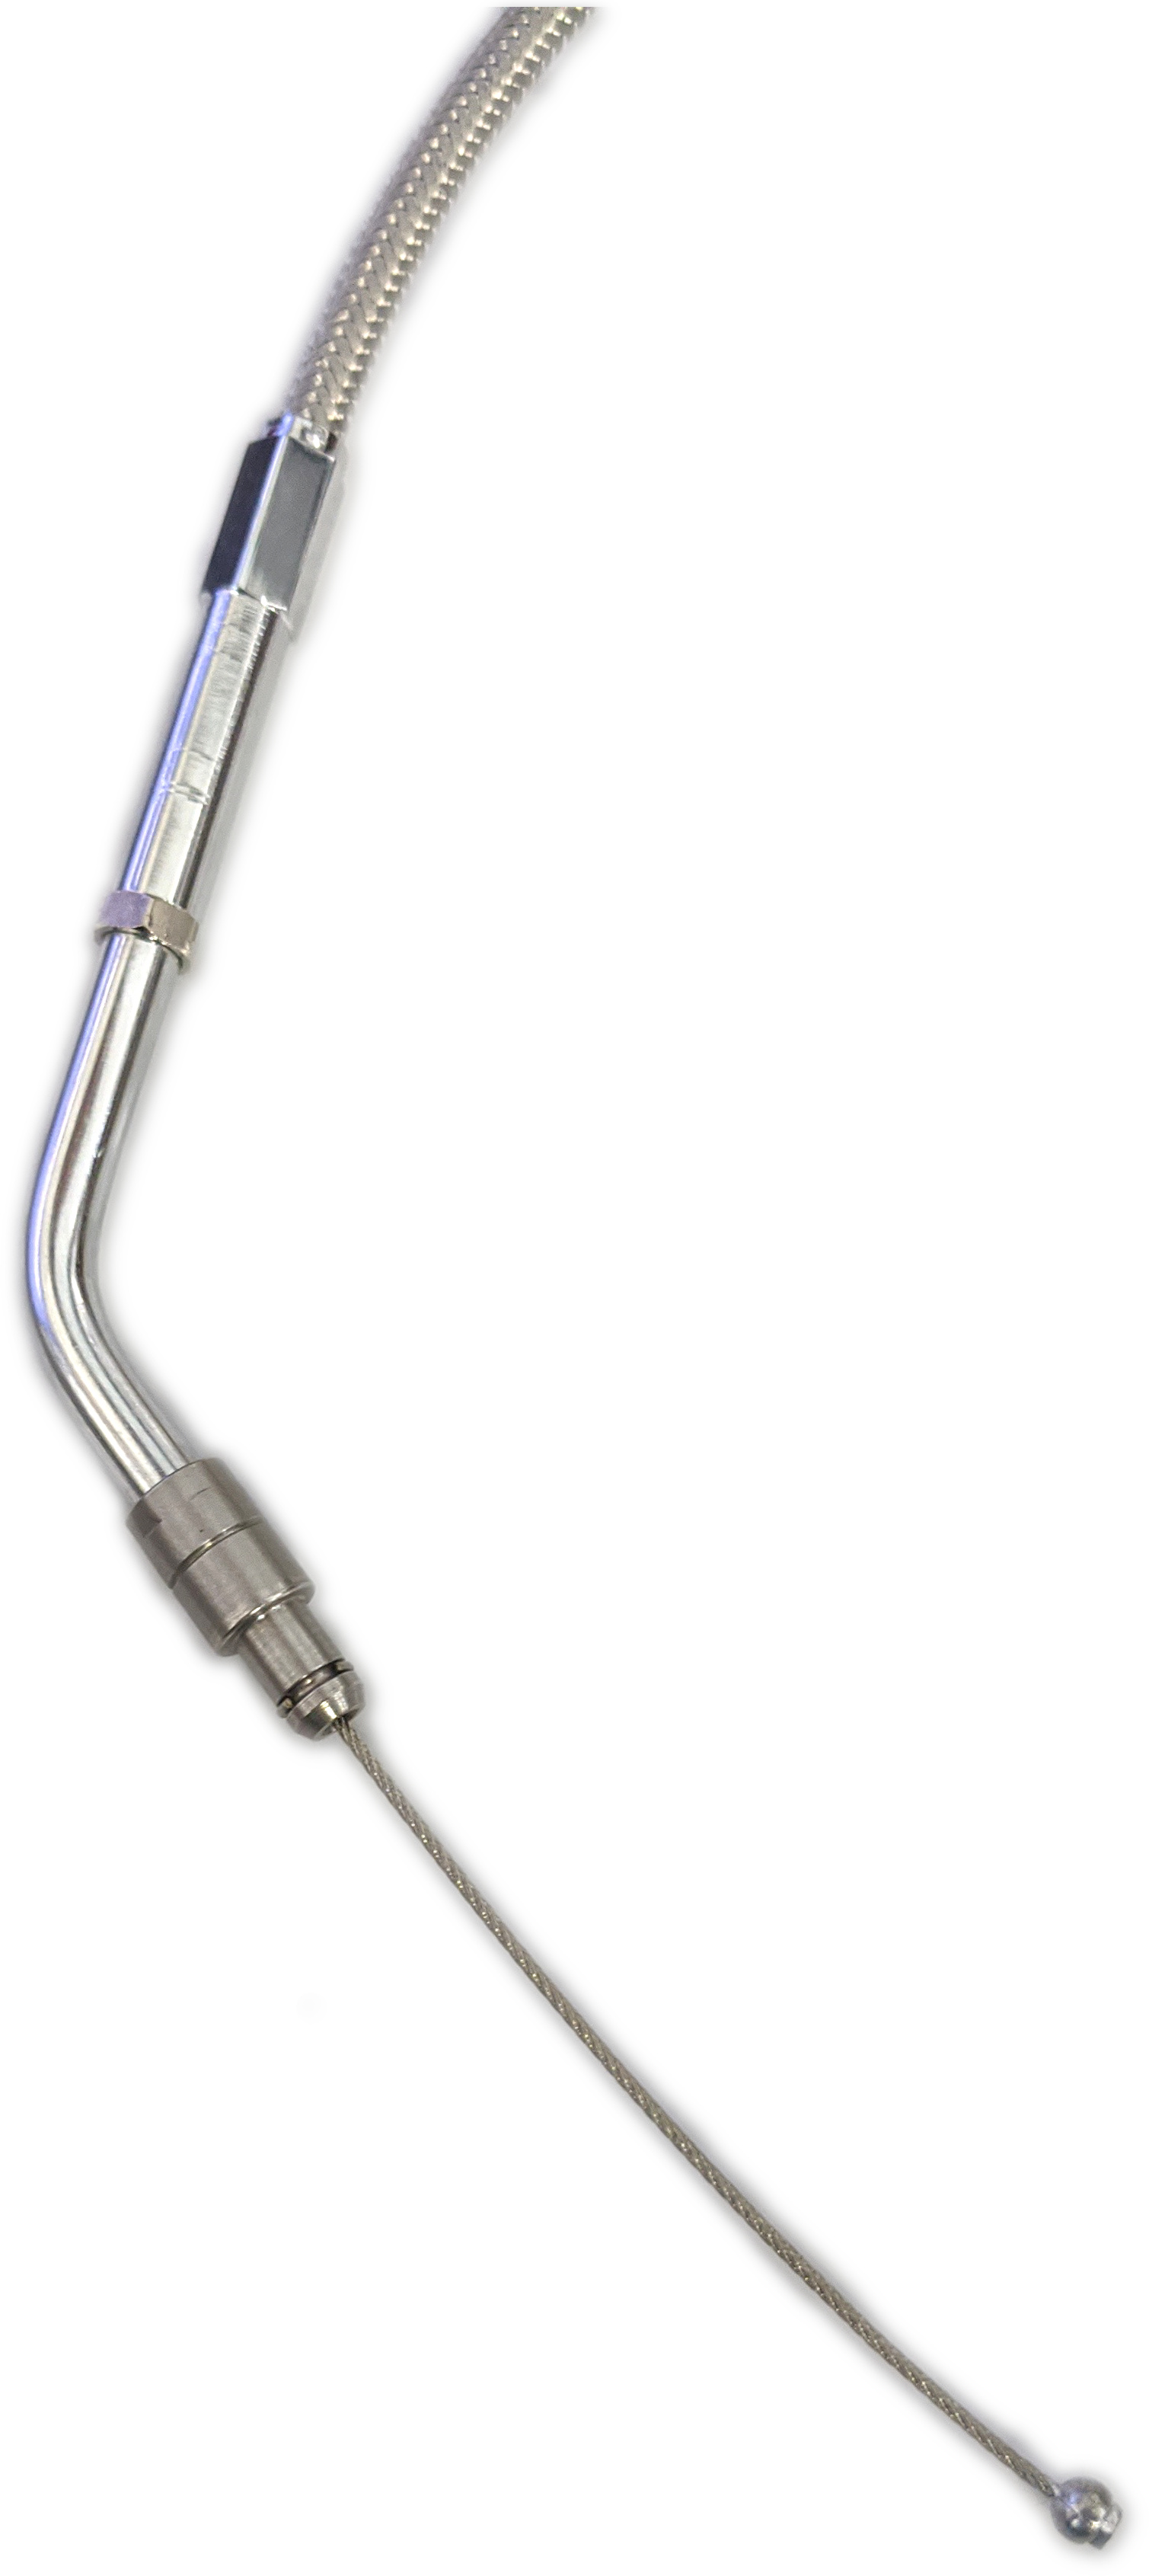 +8" Braided Stainless Steel Throttle Cable - 8" Longer Than Harley 56308-96 - Click Image to Close